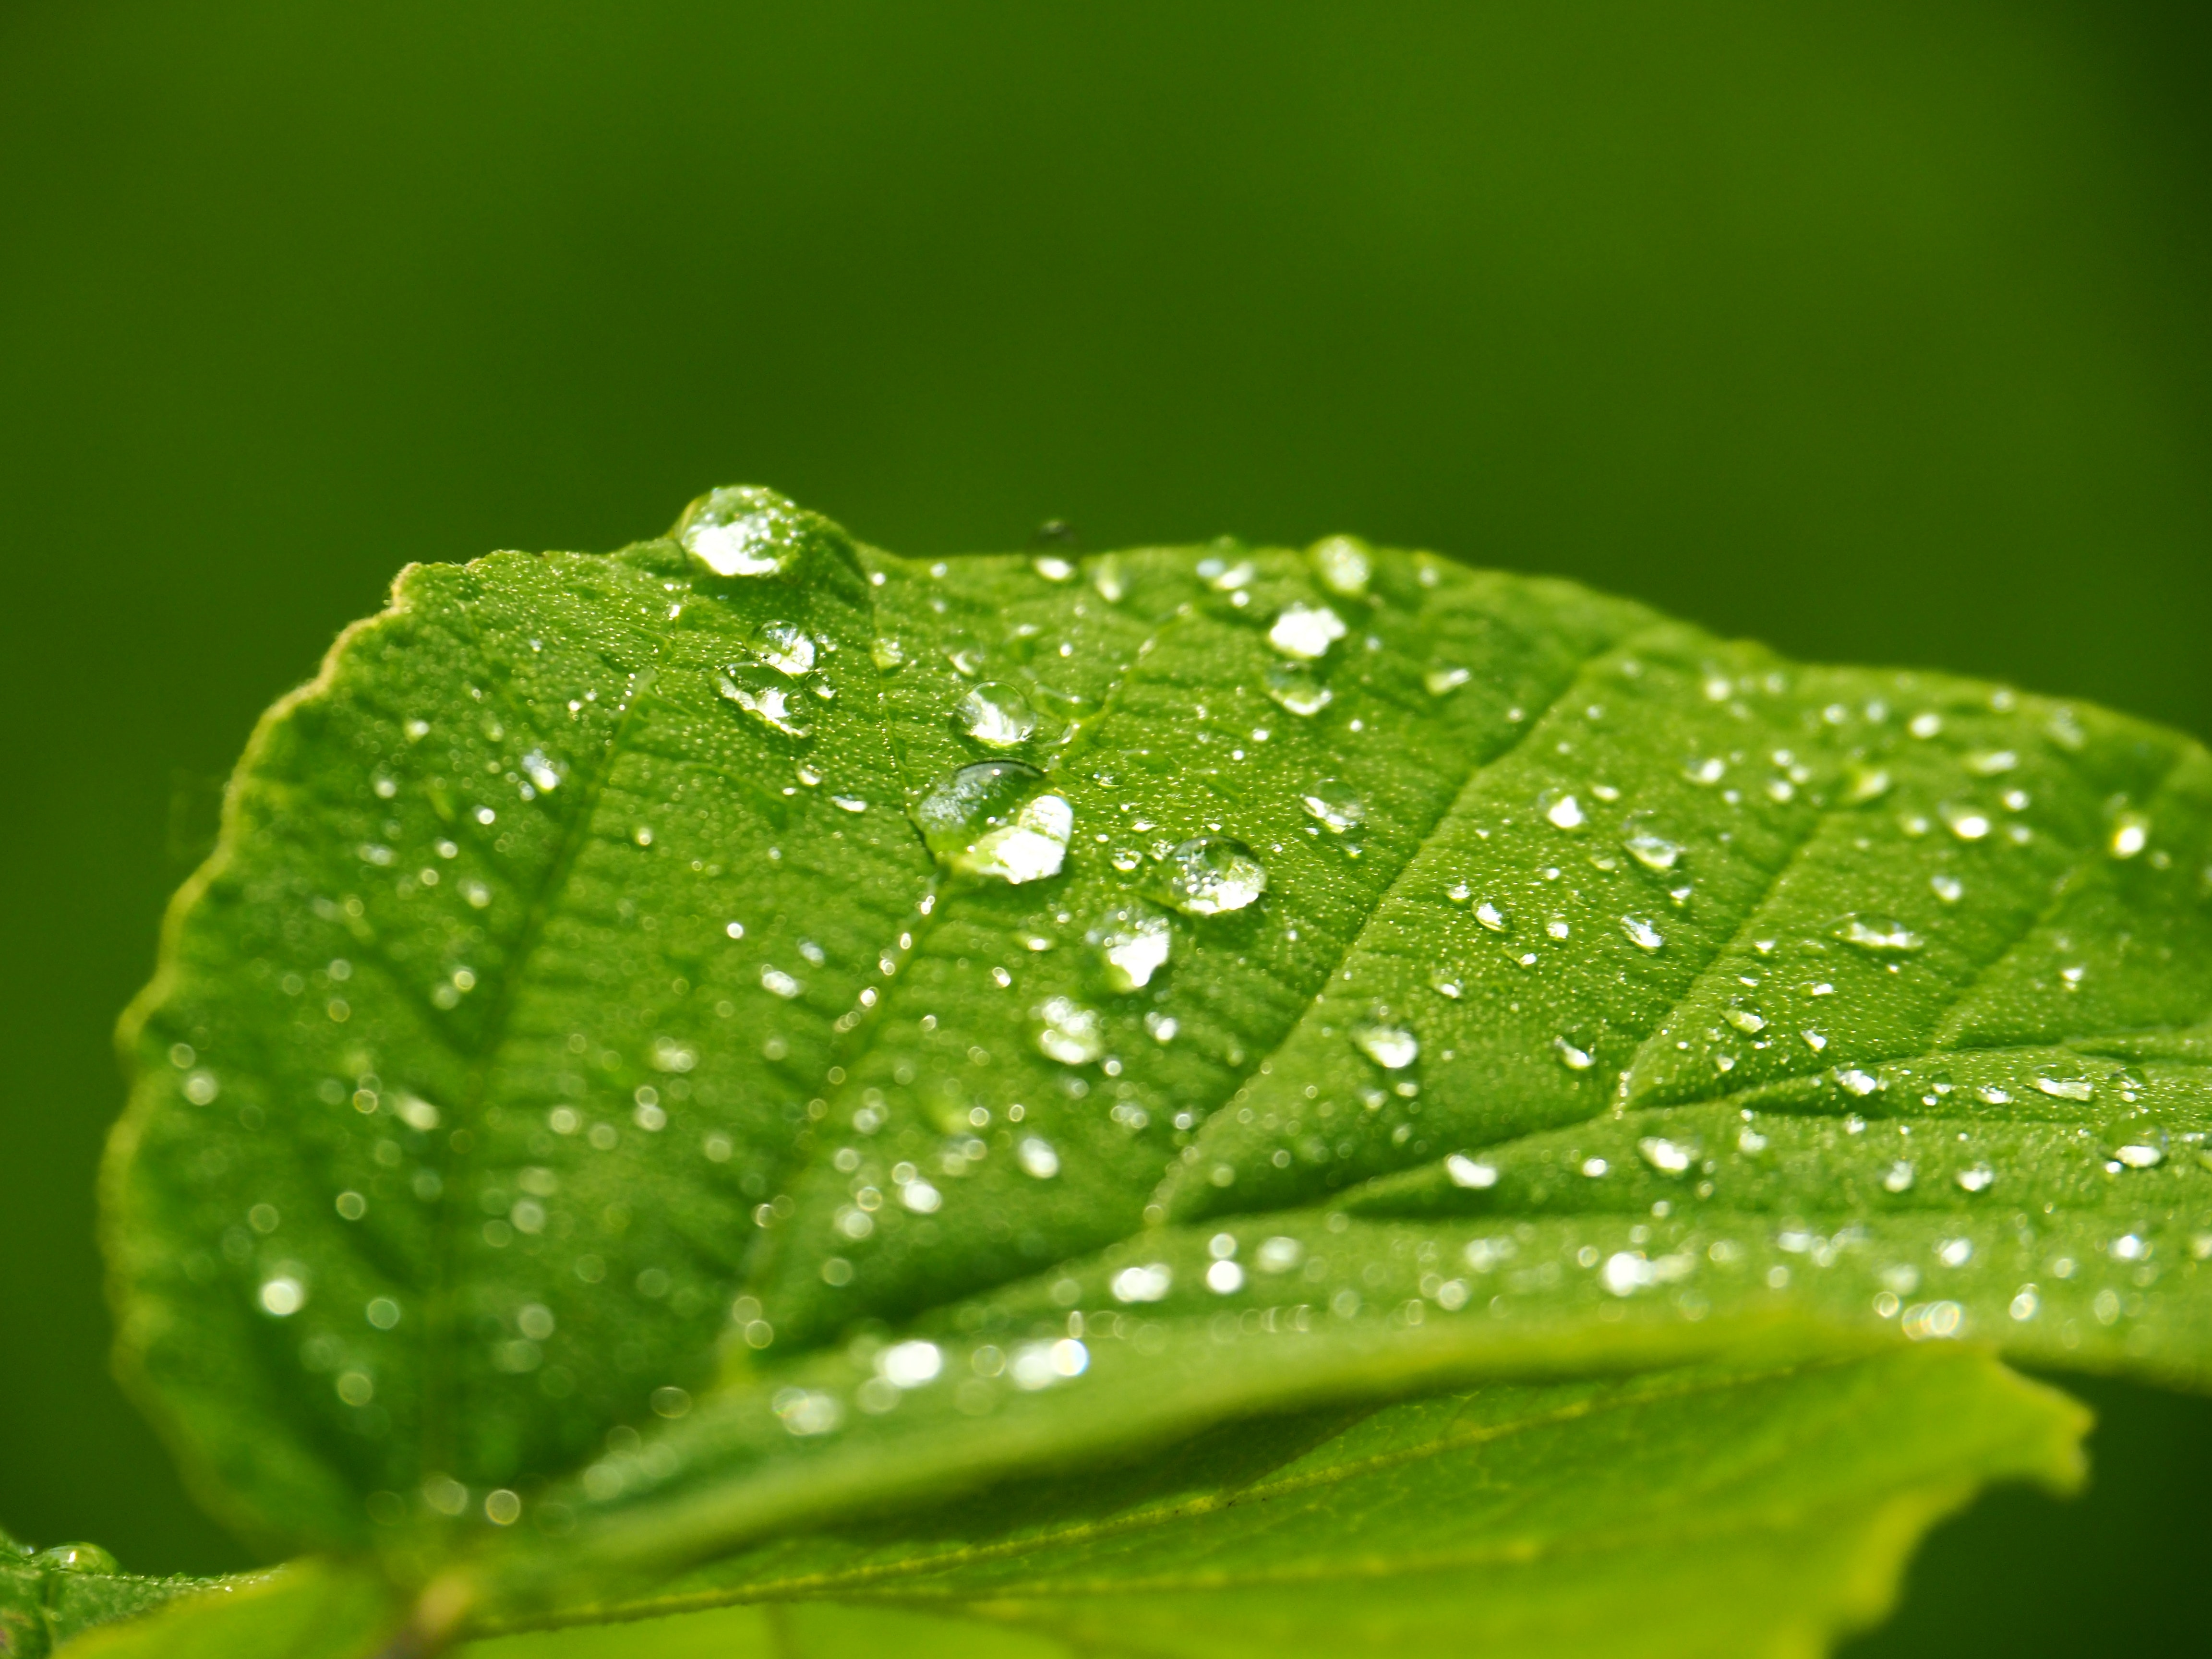 Green Leaf With Water Dew · Free Stock Photo